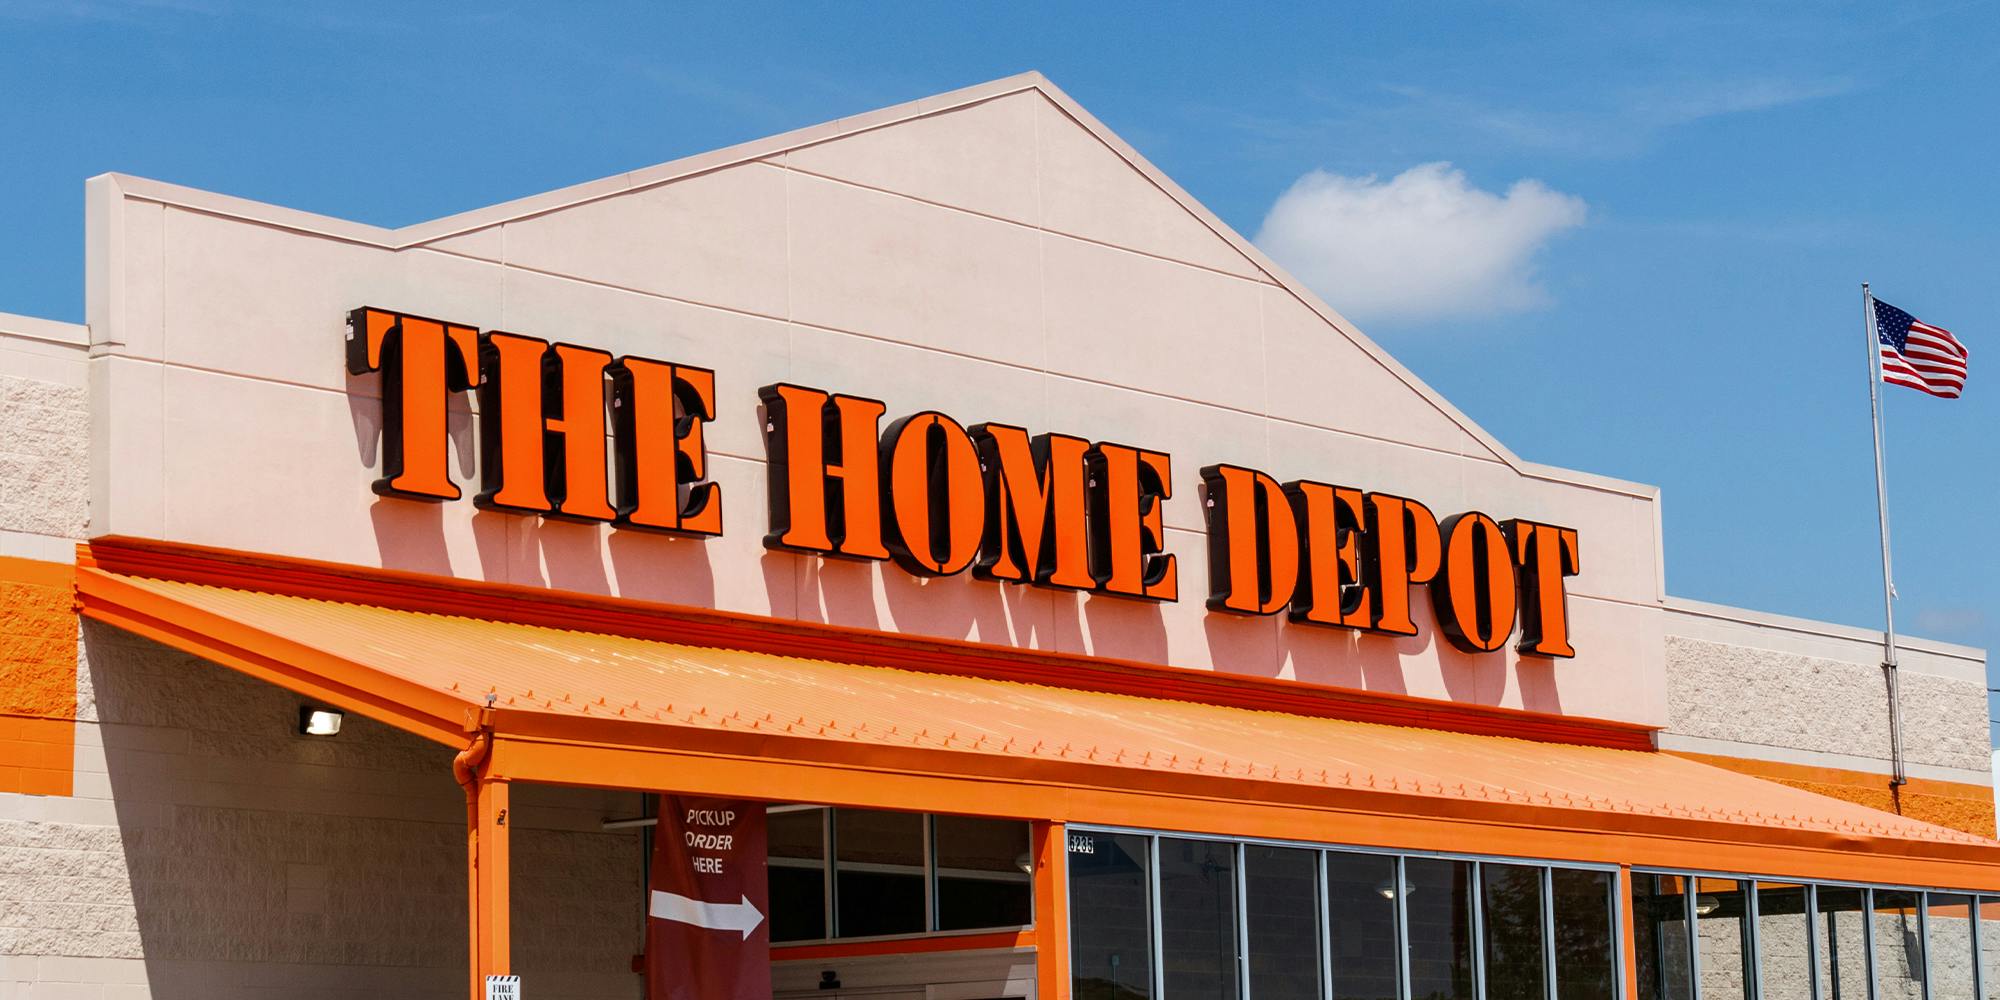 Physical Touch Home Depot Employee